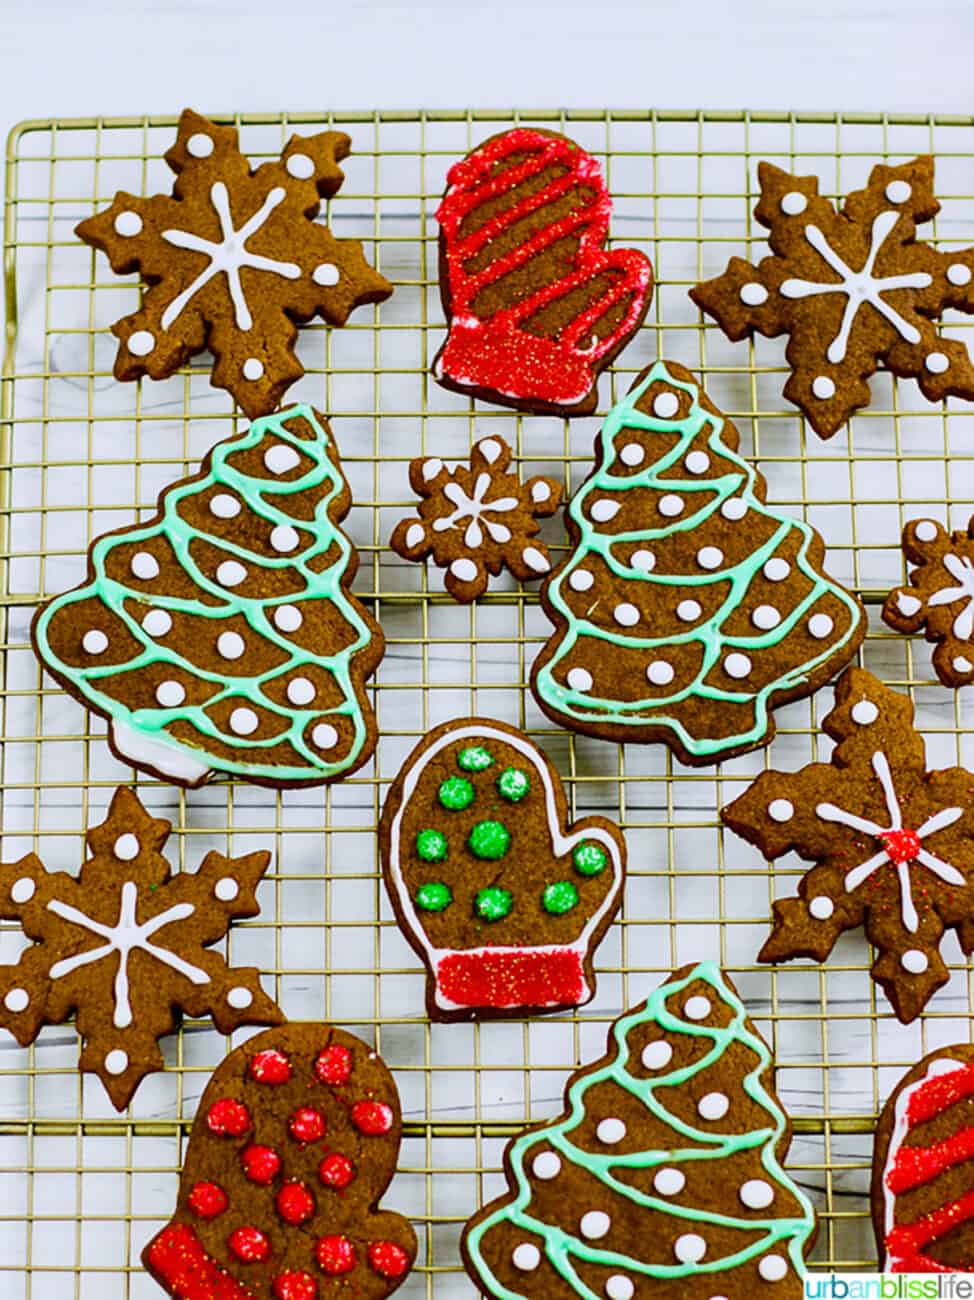 Soft Gingerbread Cookie Recipe - decorated cookies in holiday shapes